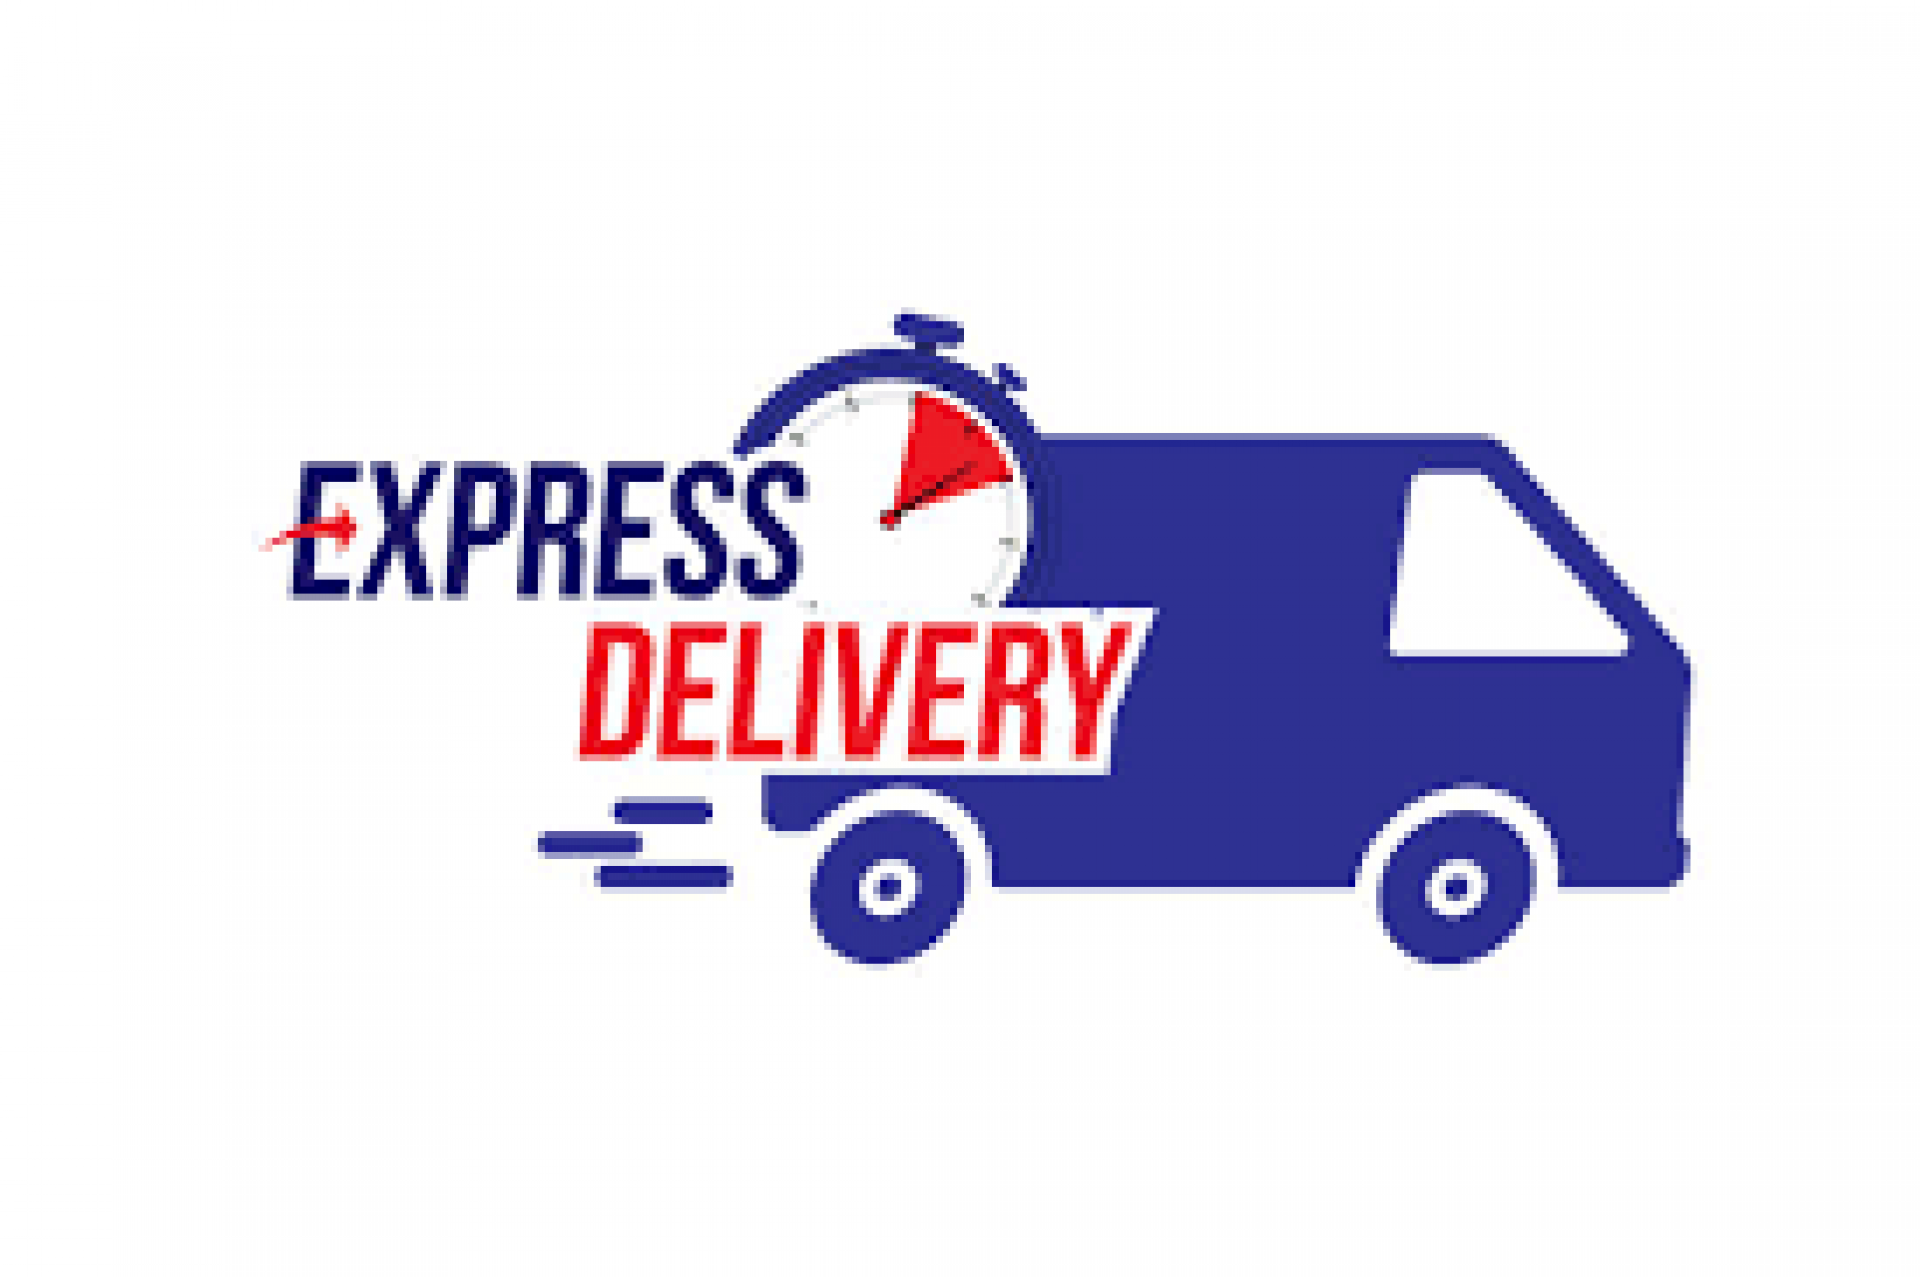 Koszty dostawy - delivery.png